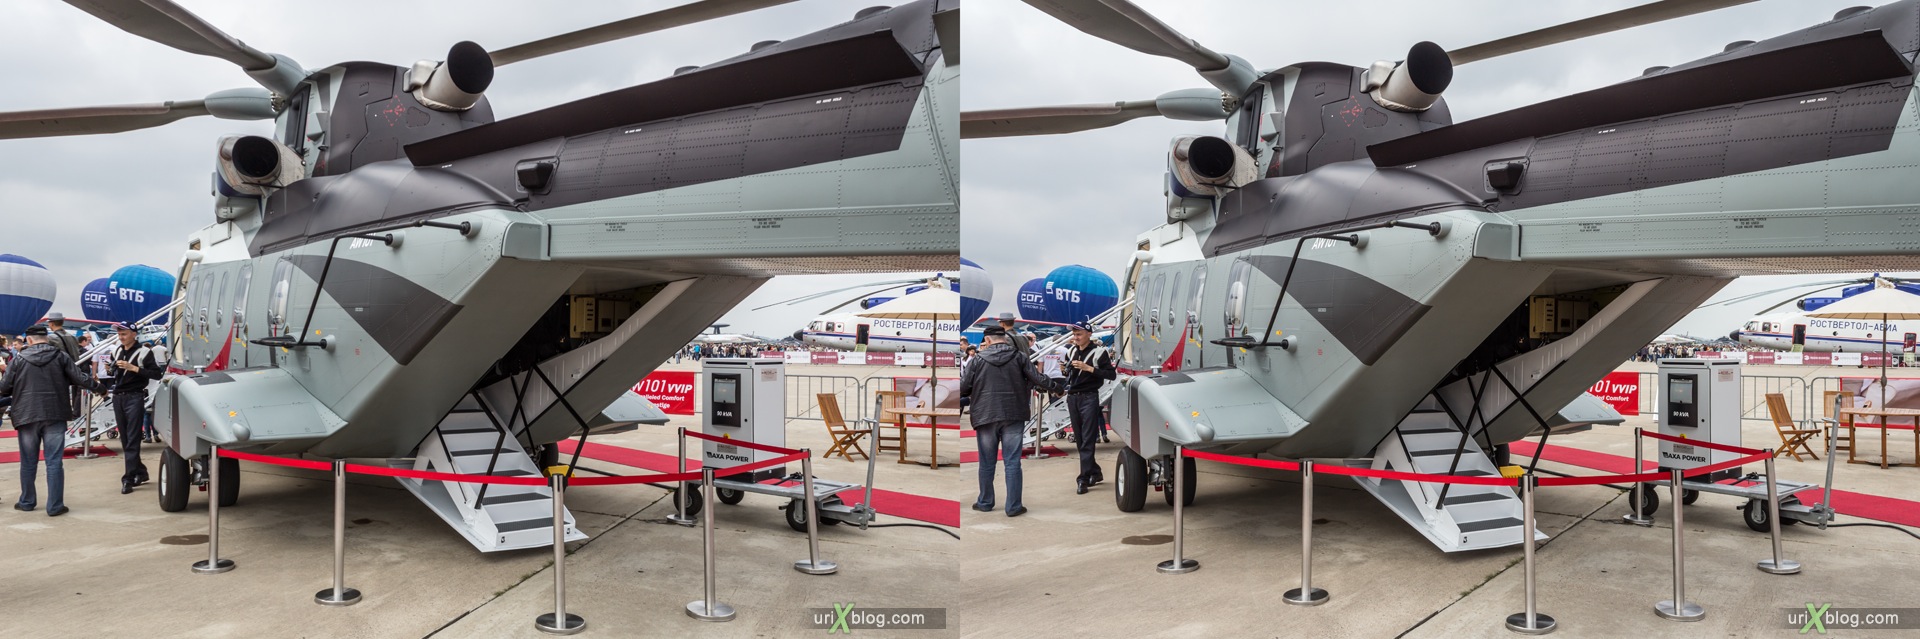 2013, MAKS, International Aviation and Space Salon, Russia, Ramenskoye airfield, Aw101 vvip, helicopter, 3D, stereo pair, cross-eyed, crossview, cross view stereo pair, stereoscopic